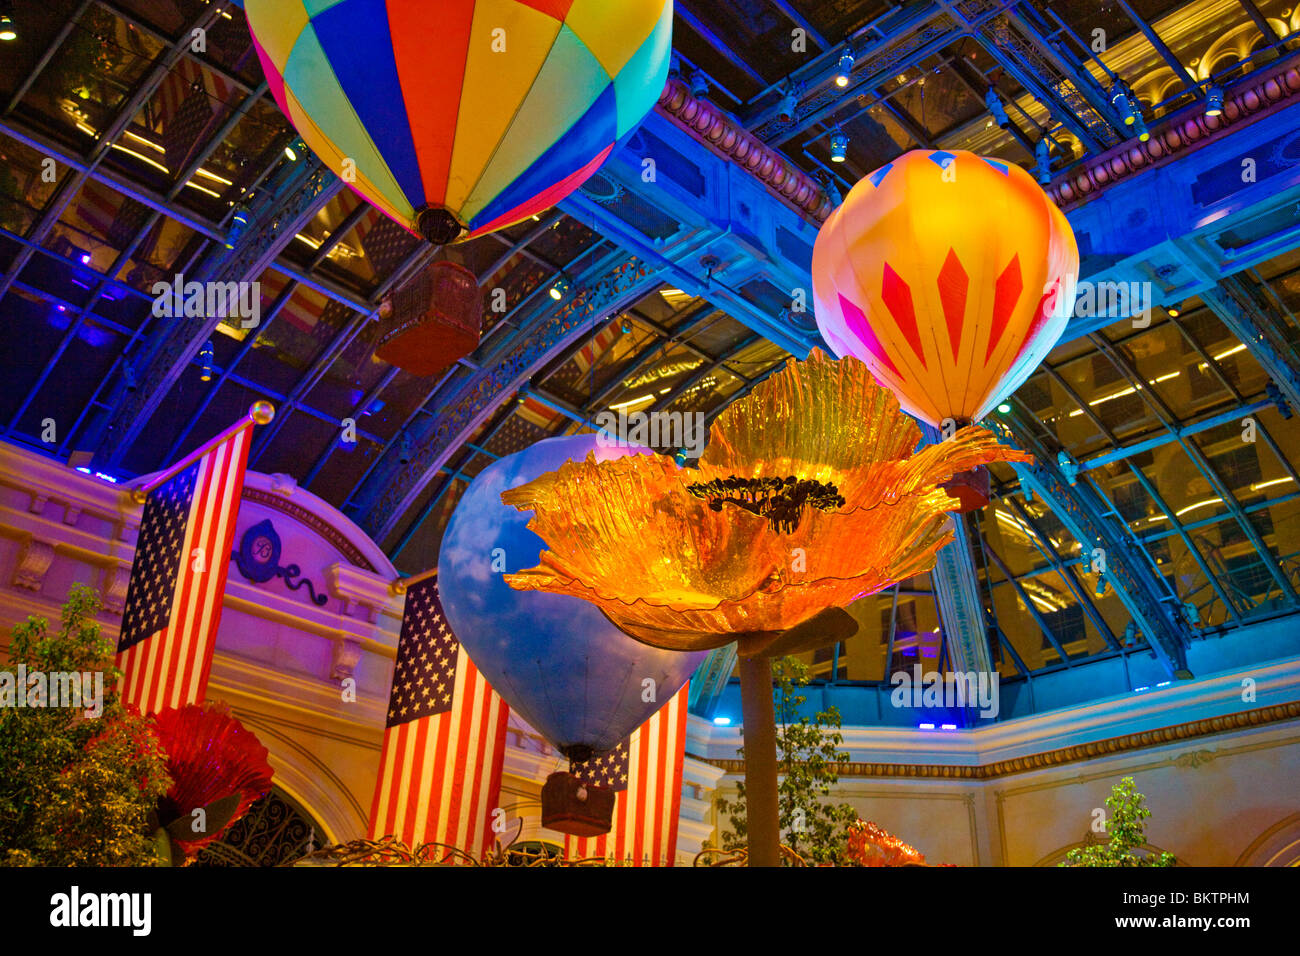 Fantasy BALLOONS and DALE CHIHULY GLASS FLOWER at the BELLAGIO HOTEL AND CASINO - LAS VEGAS, NEVADA Stock Photo